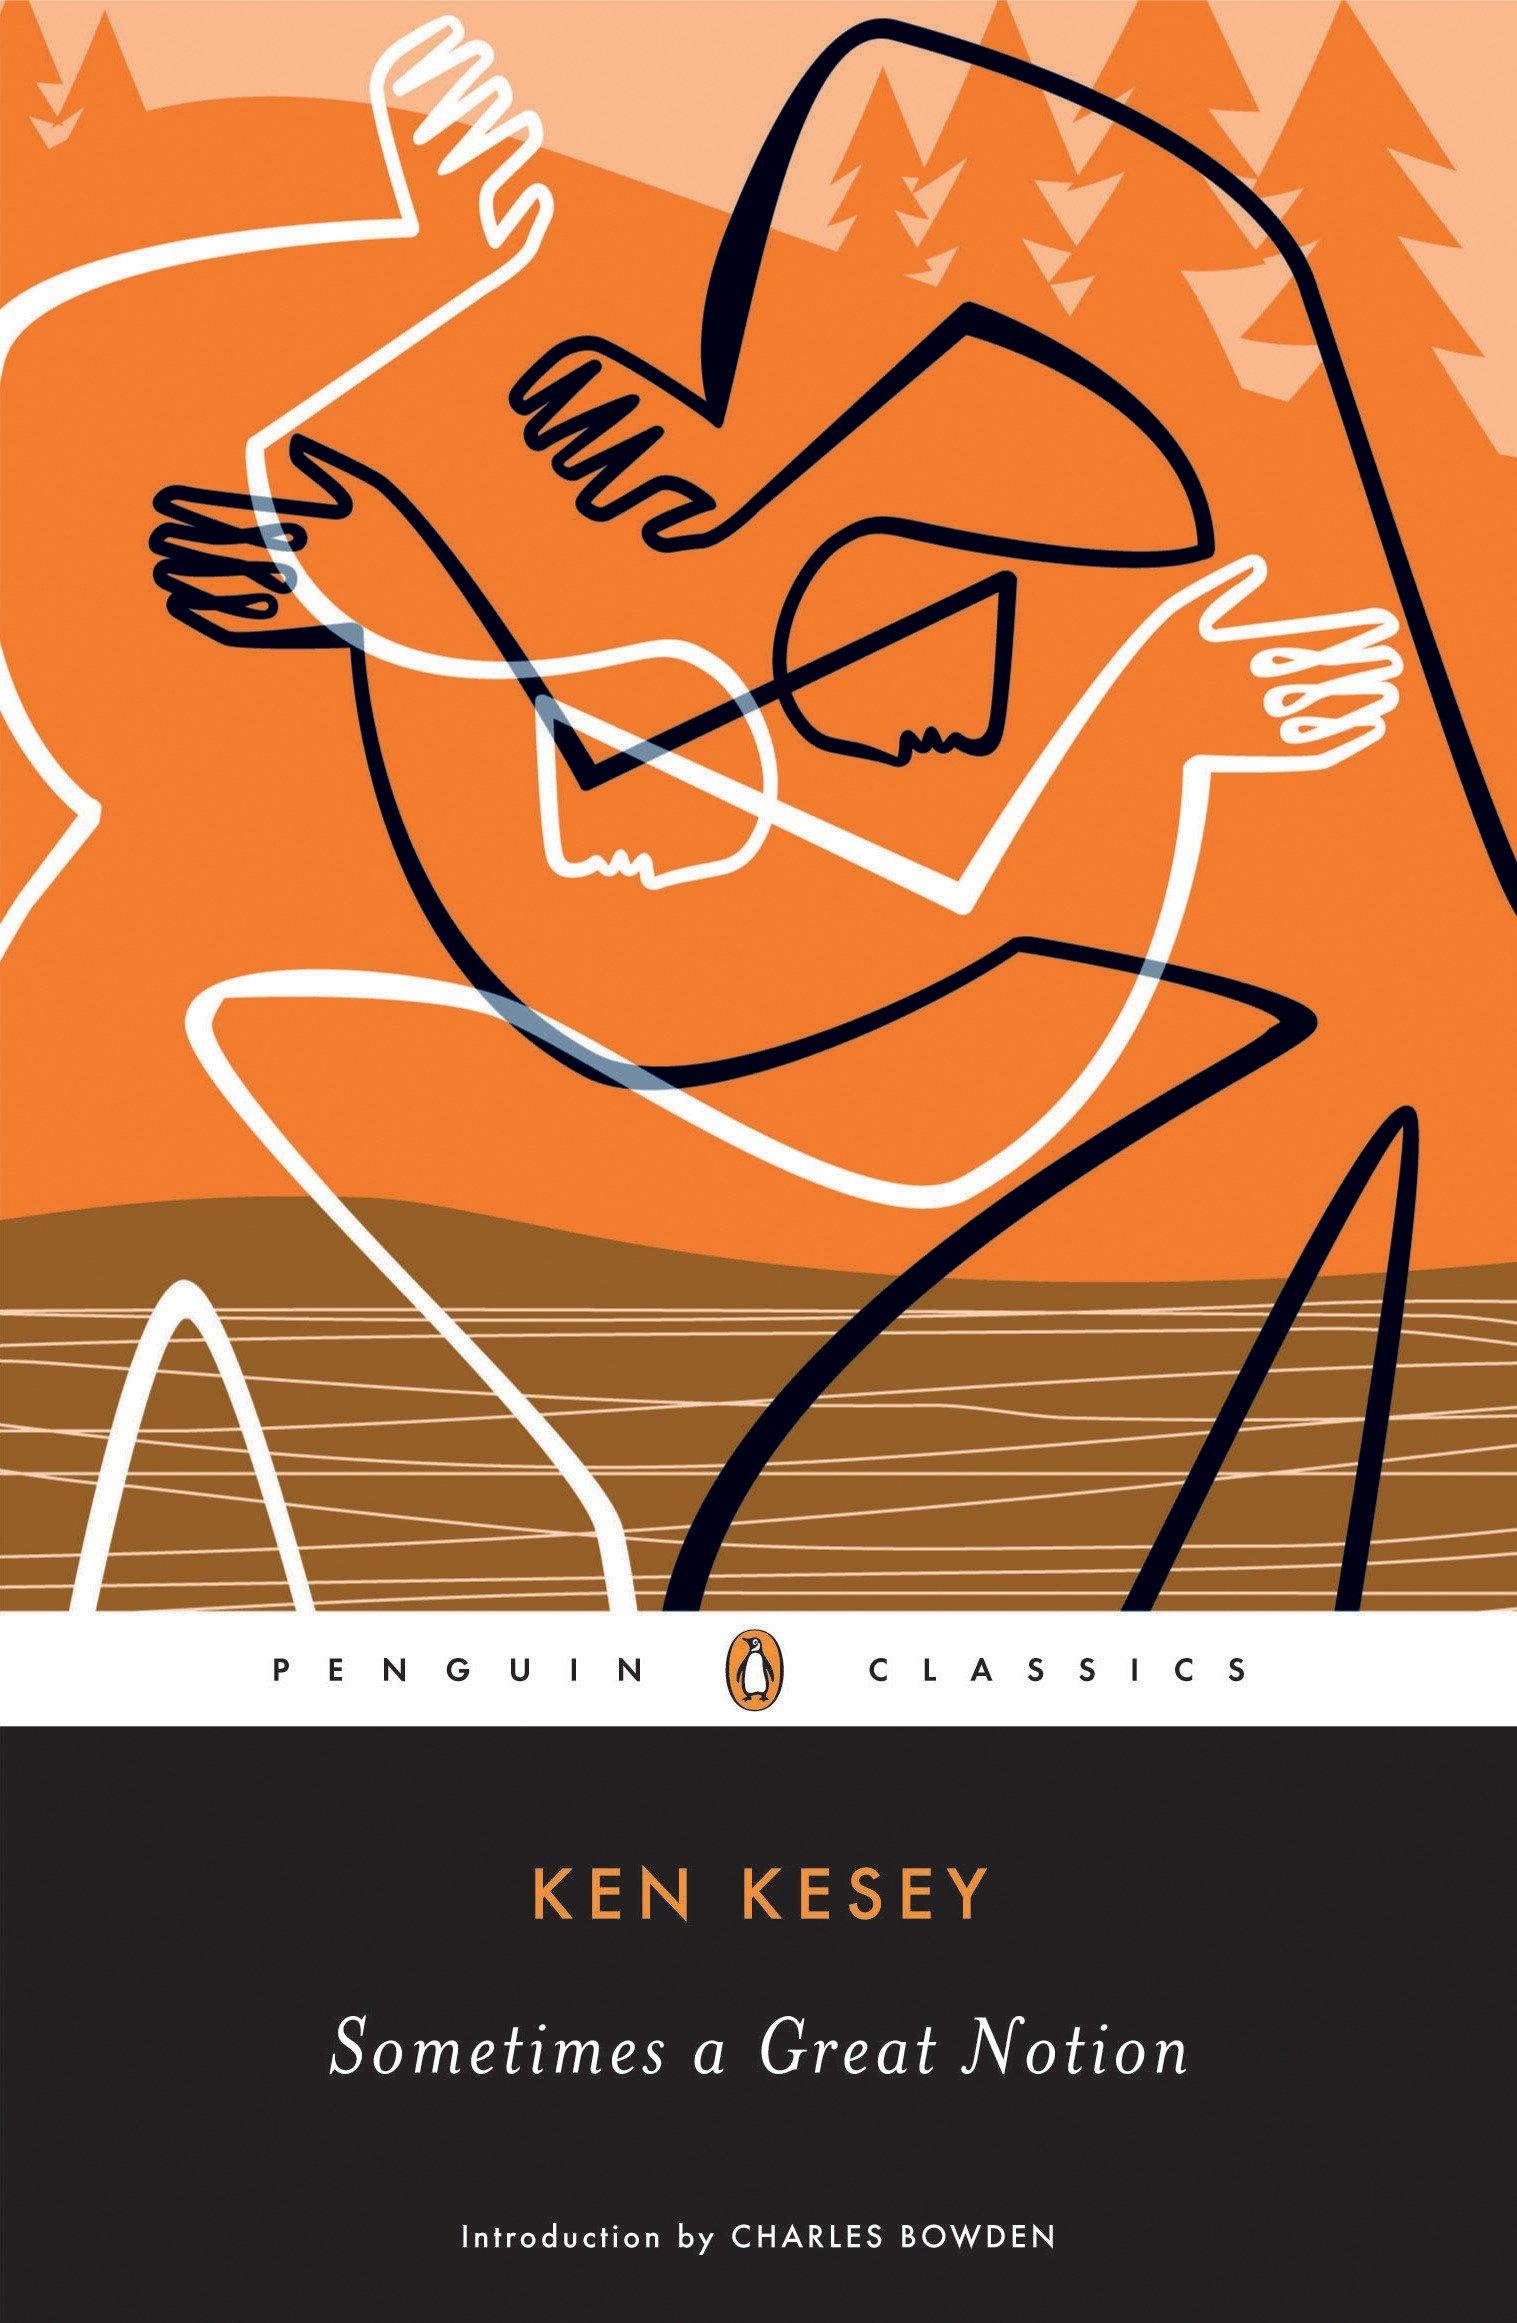 Sometimes a Great Notion - Ken Kesey